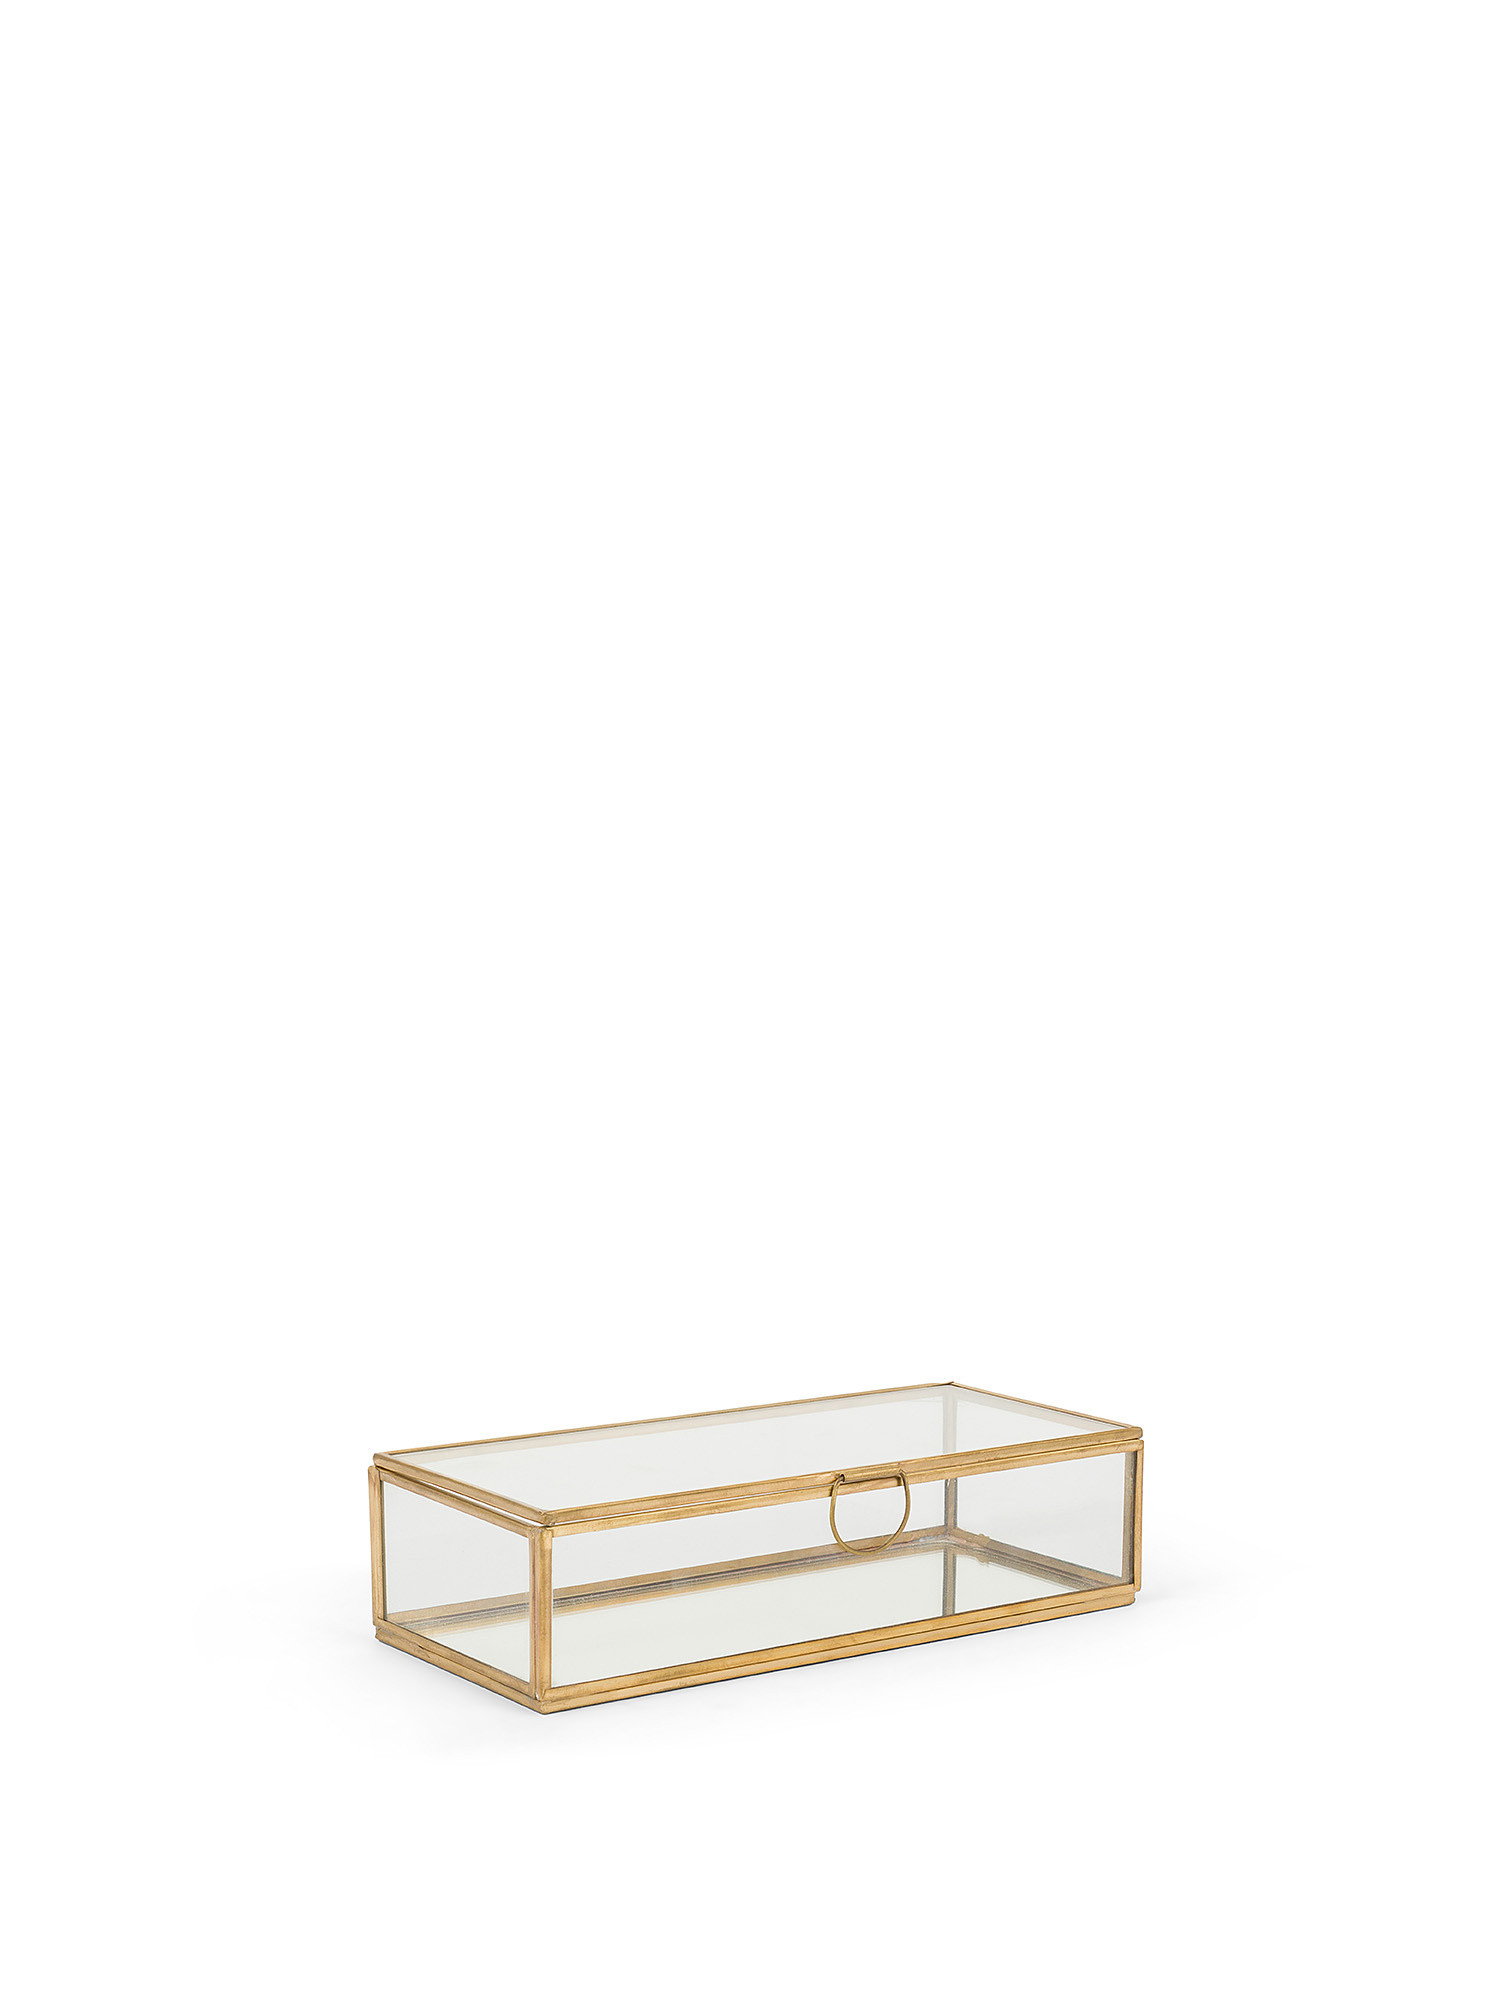 Glass jewelery box with golden edges, Transparent, large image number 0